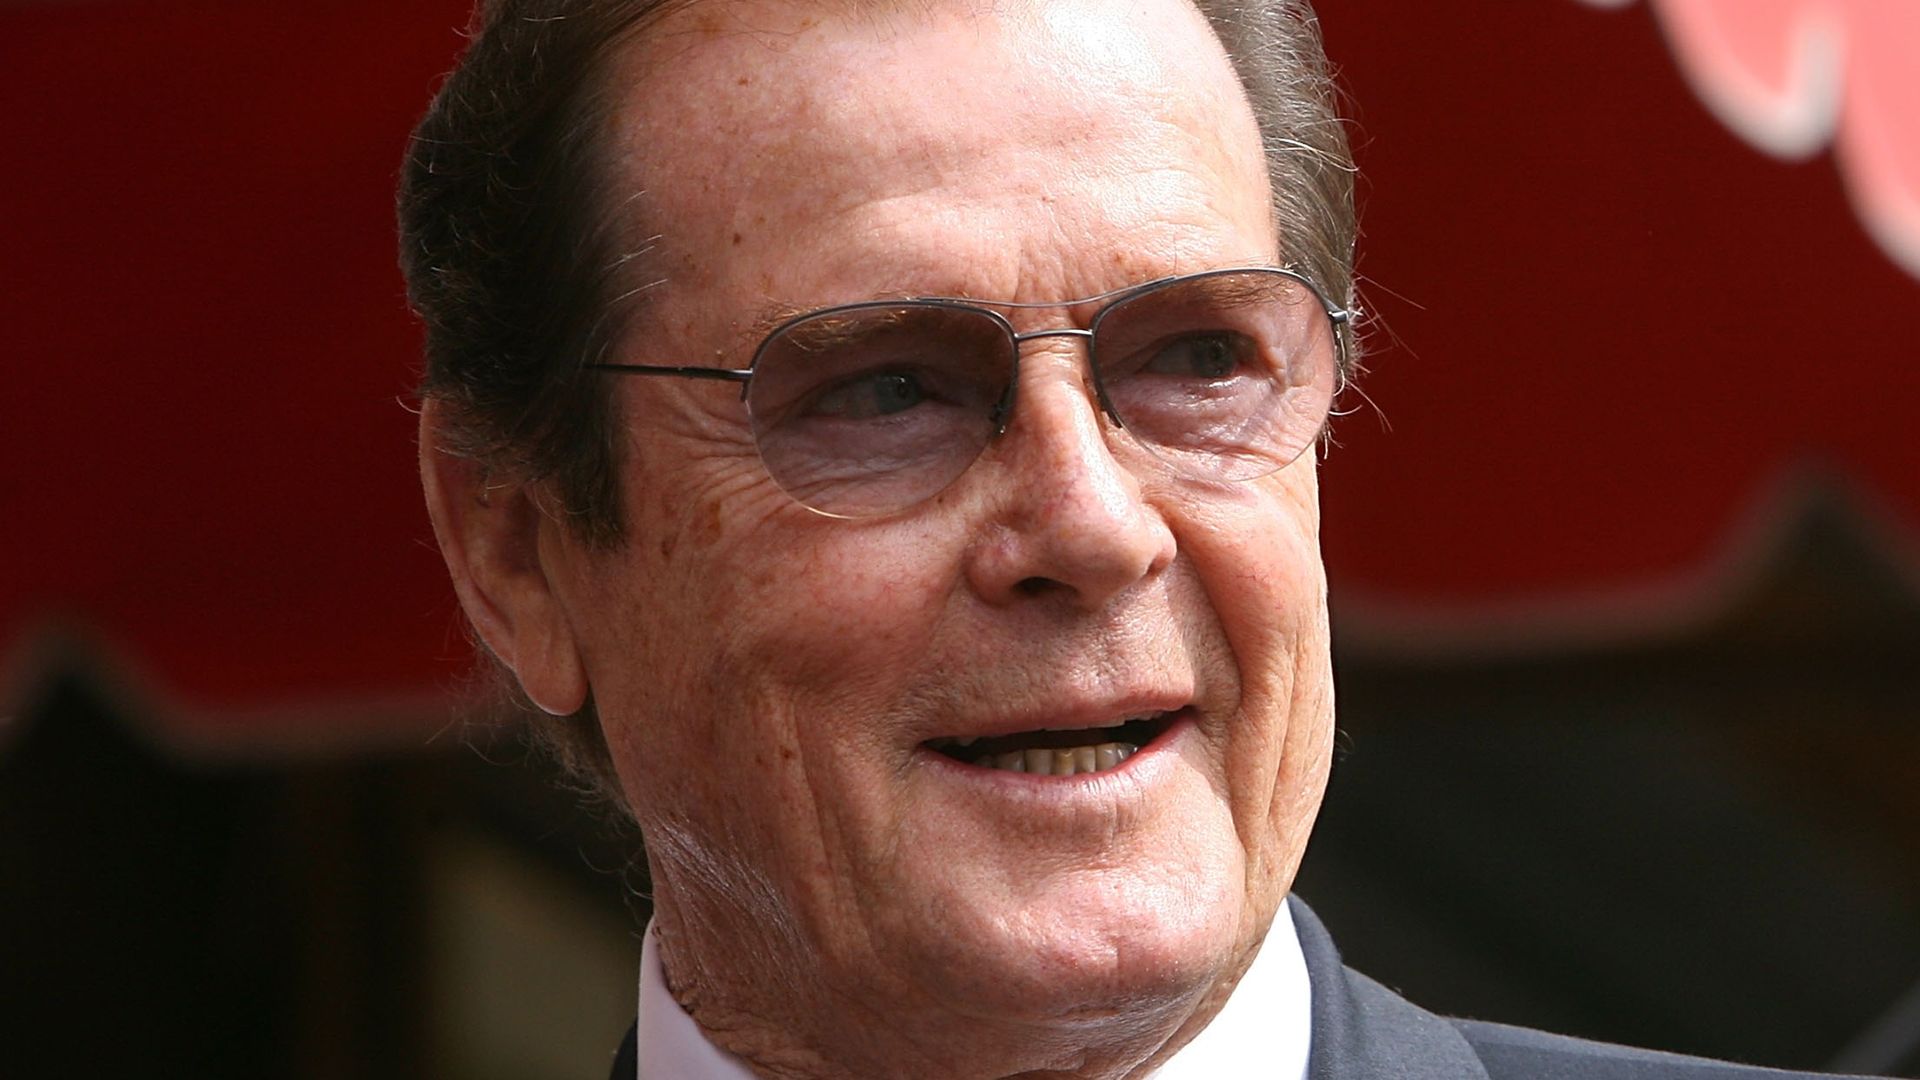 Sir Roger Moore smiling looking to the right wearing tinted glasses